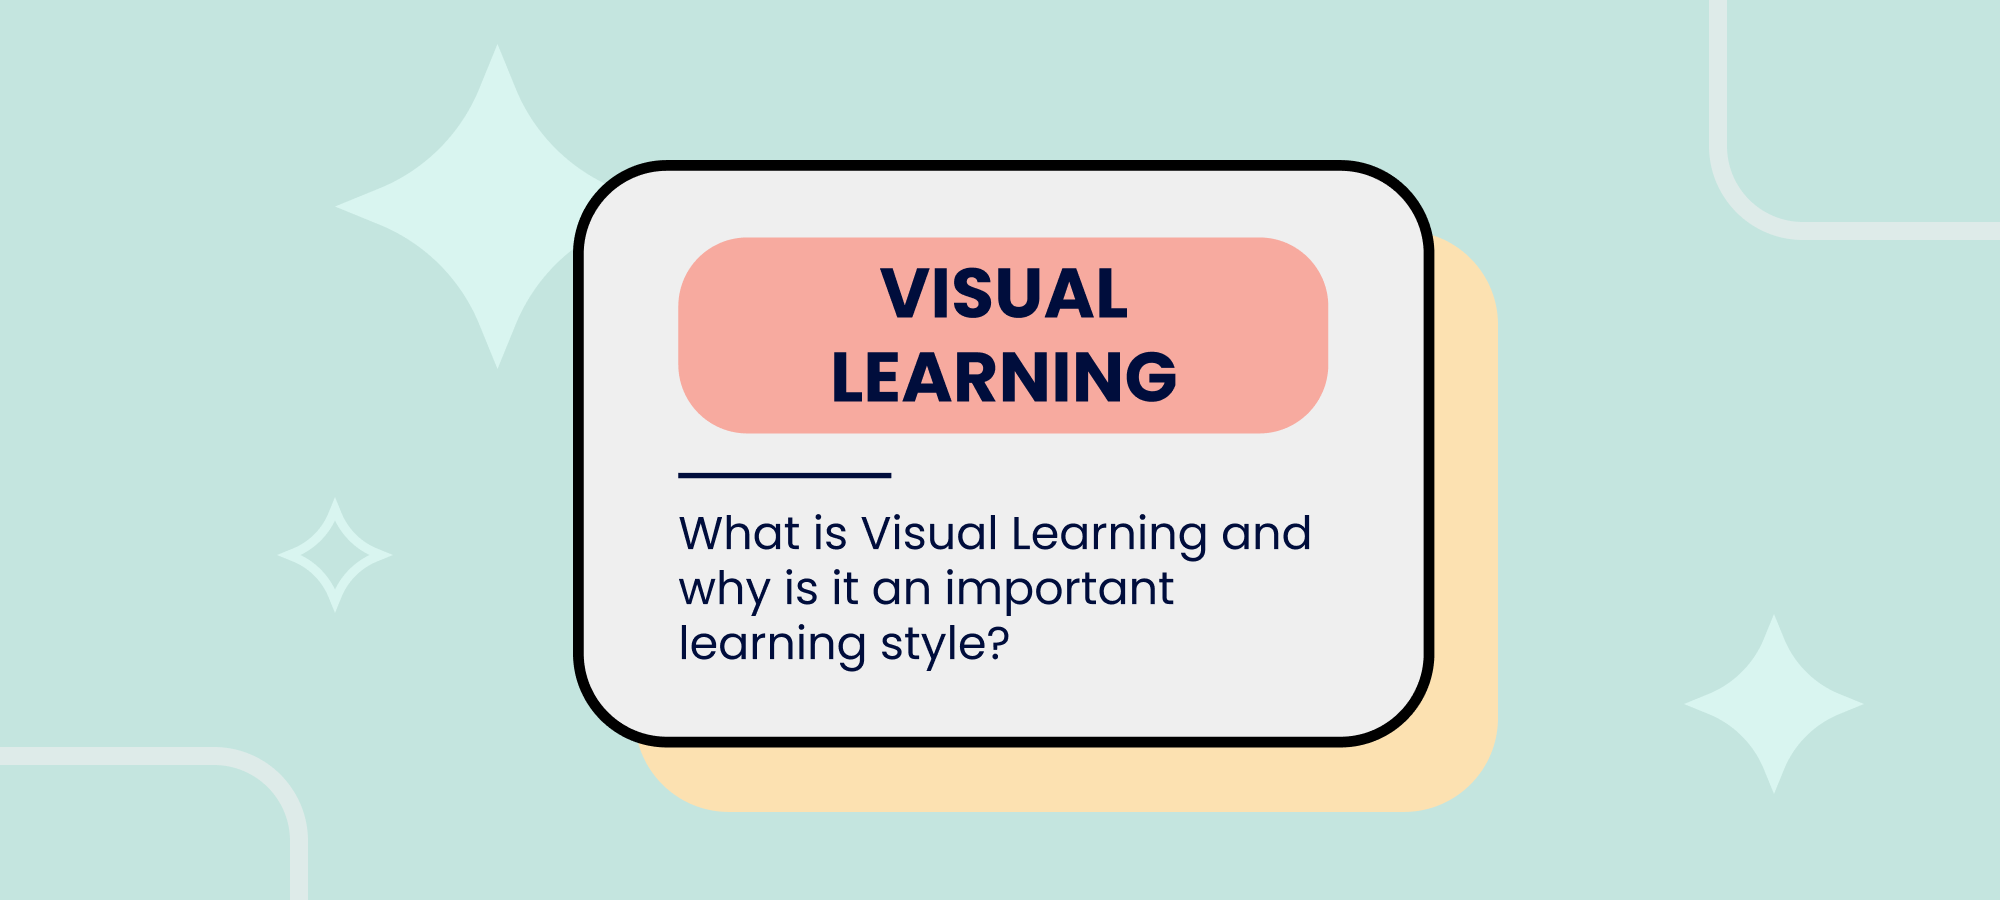 essay about visual learning style